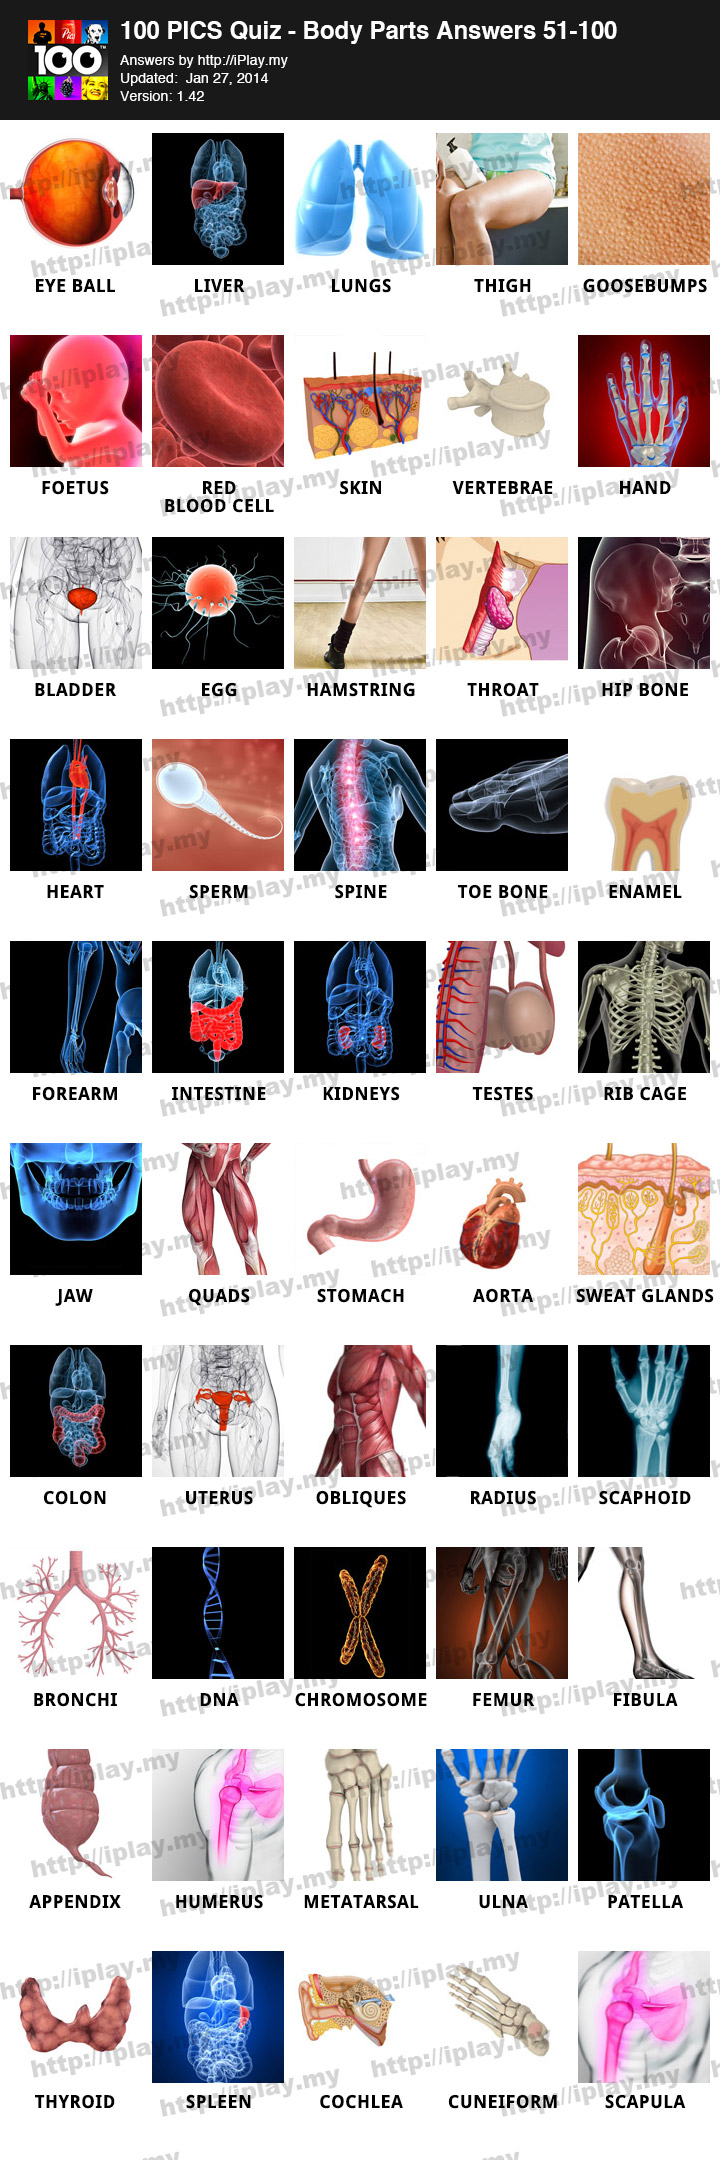 100-Pics-Quiz-Body-Parts-Pack-Answers-51-100